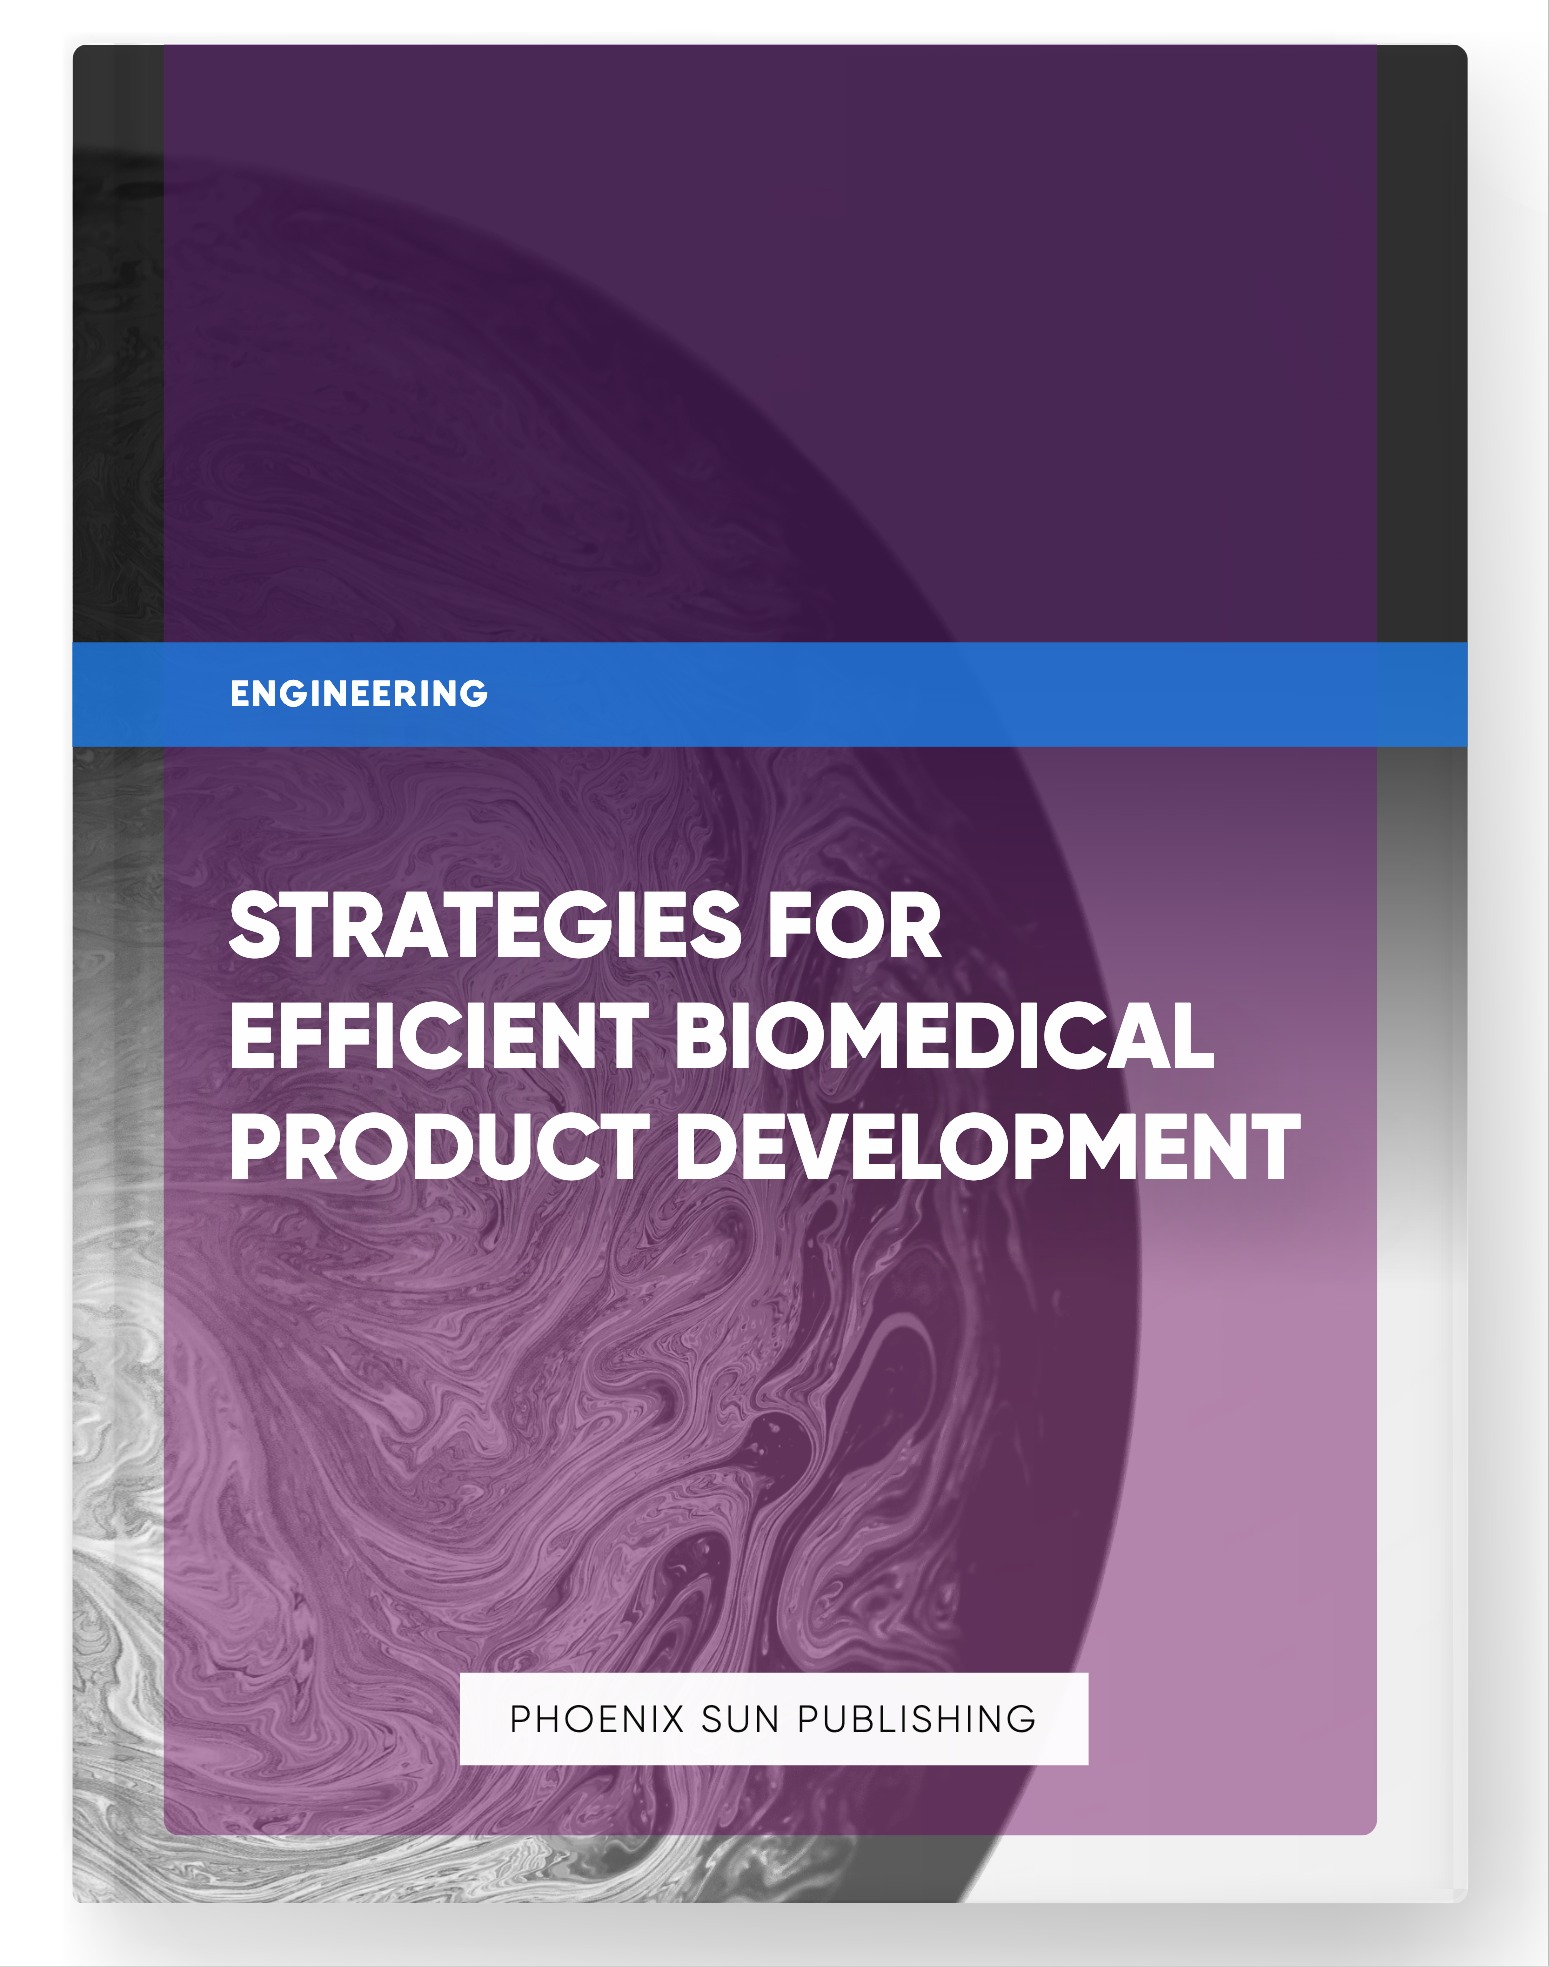 Strategies for Efficient Biomedical Product Development